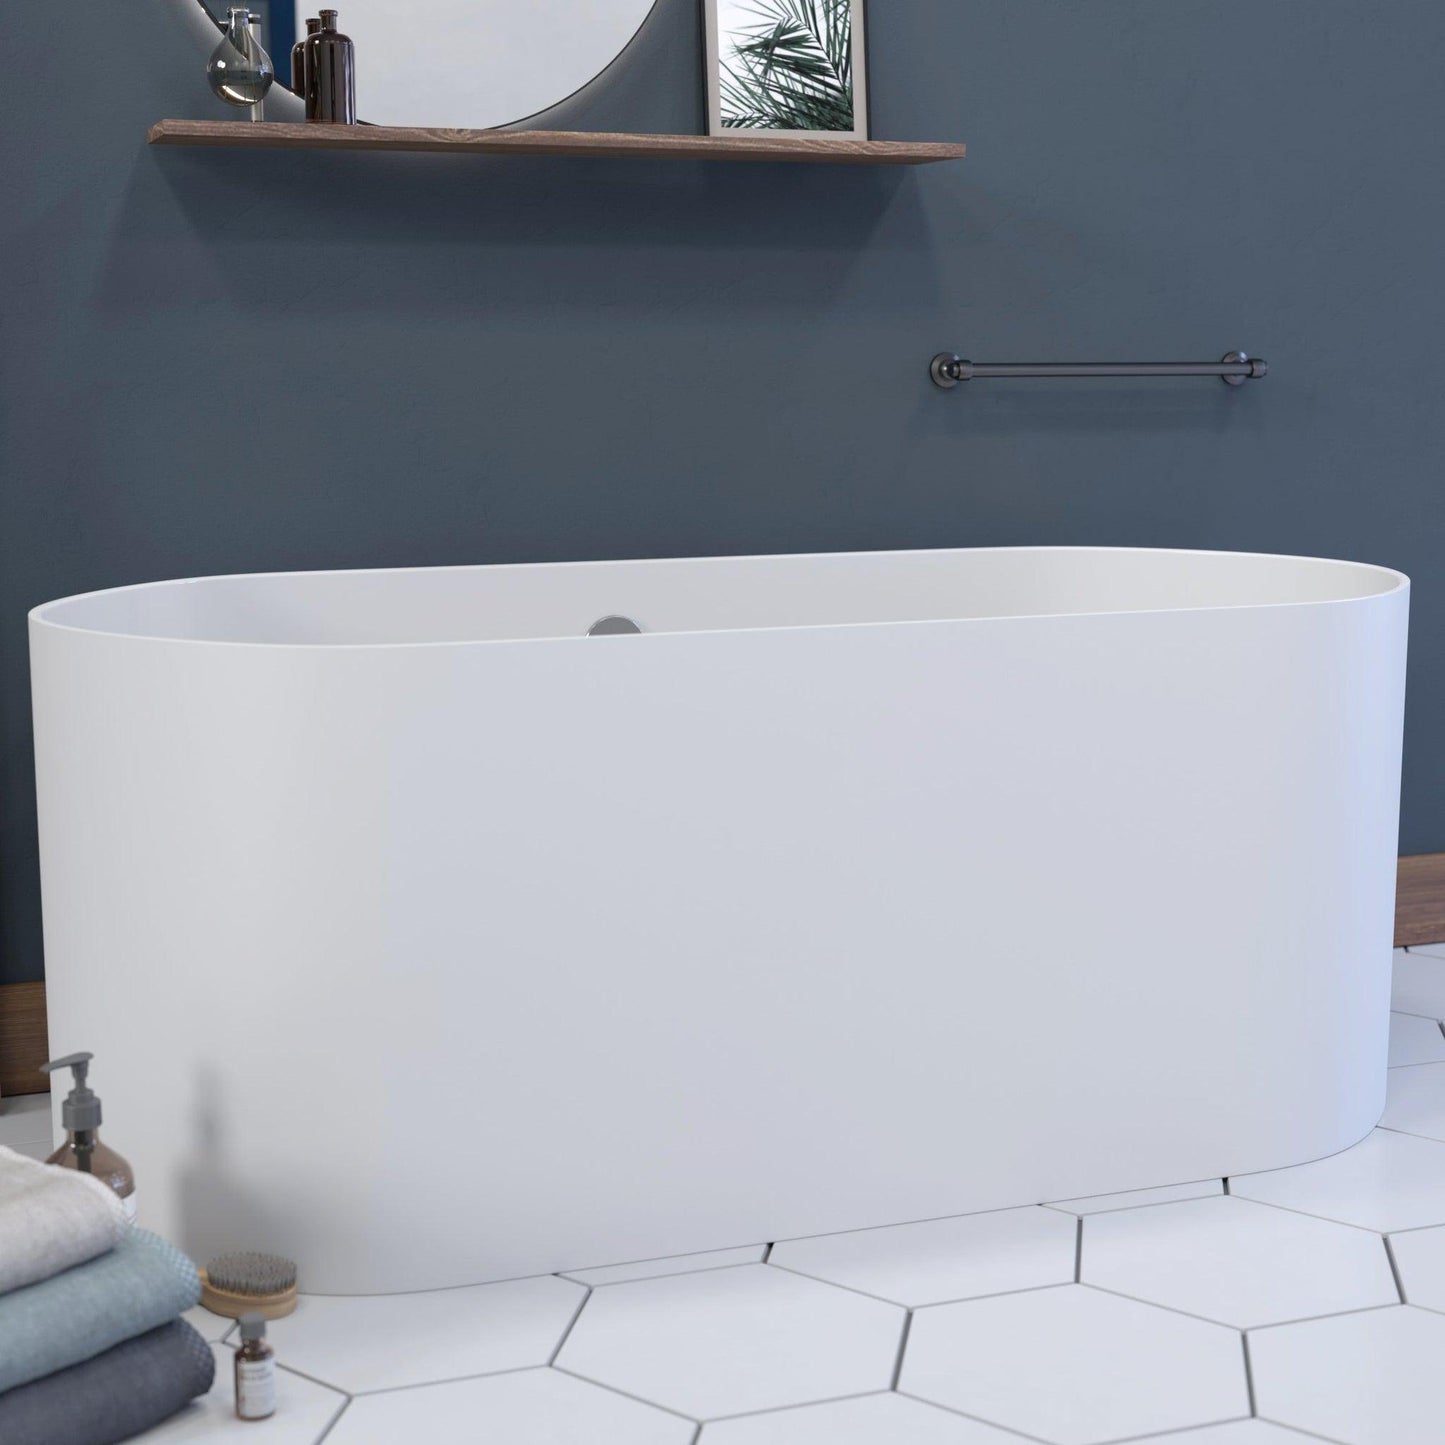 Cambridge Plumbing 71" White Mineral Composite Double Ended Pedestal Bathtub With No Faucet Holes With Polished Chrome Drain And Overflow Assembly